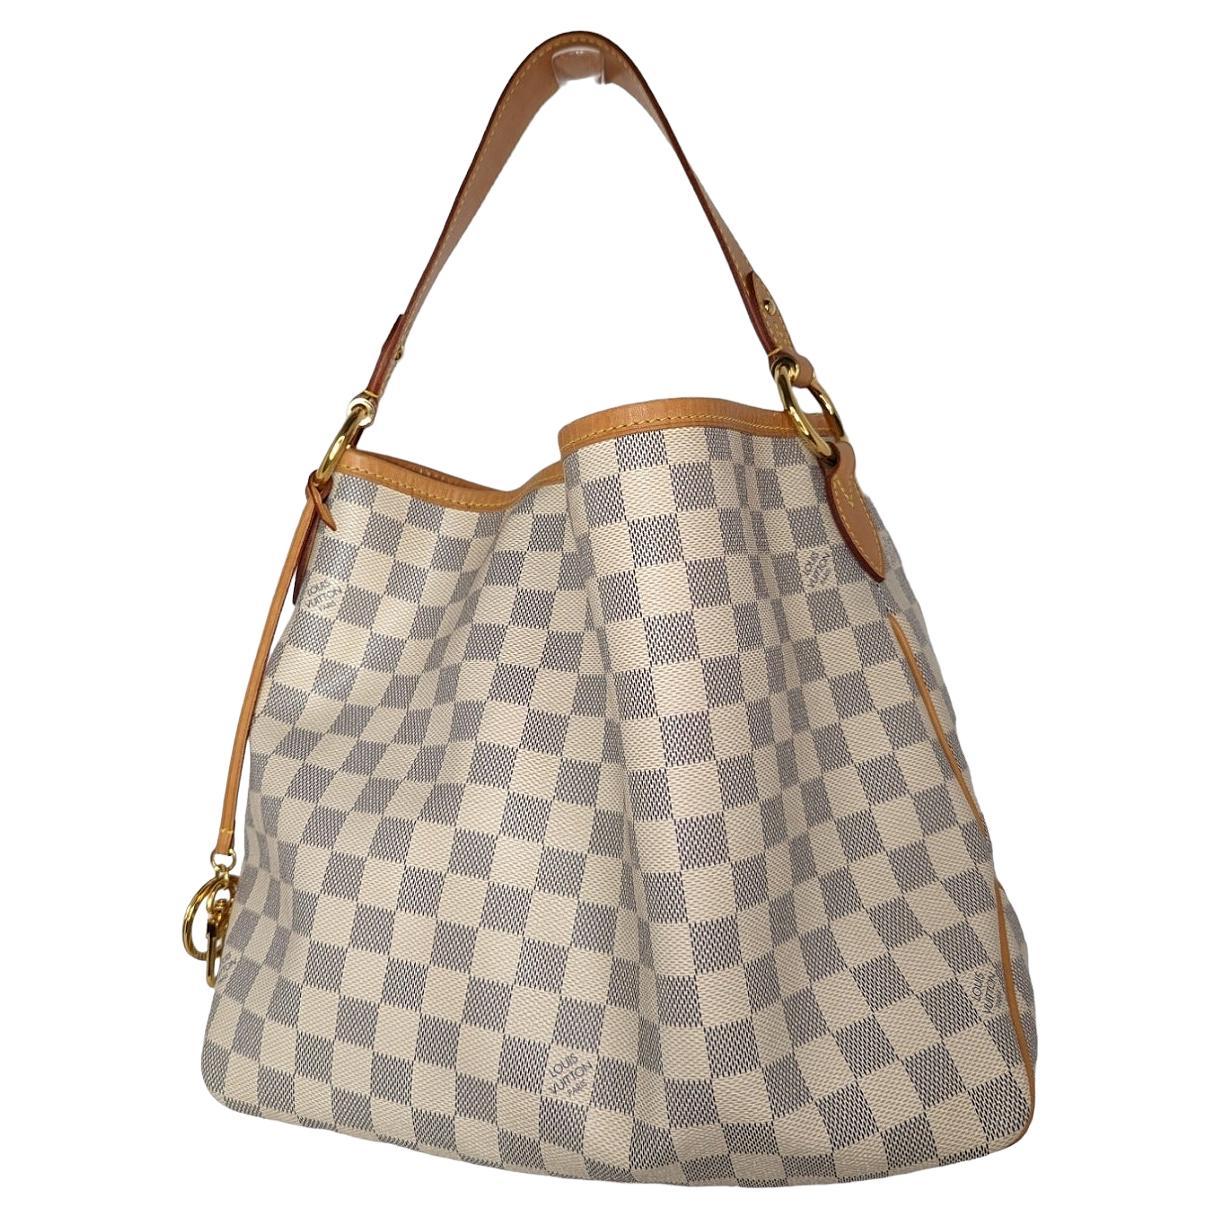 Louis Vuitton Damier Azur Pink Lining - 3 For Sale on 1stDibs